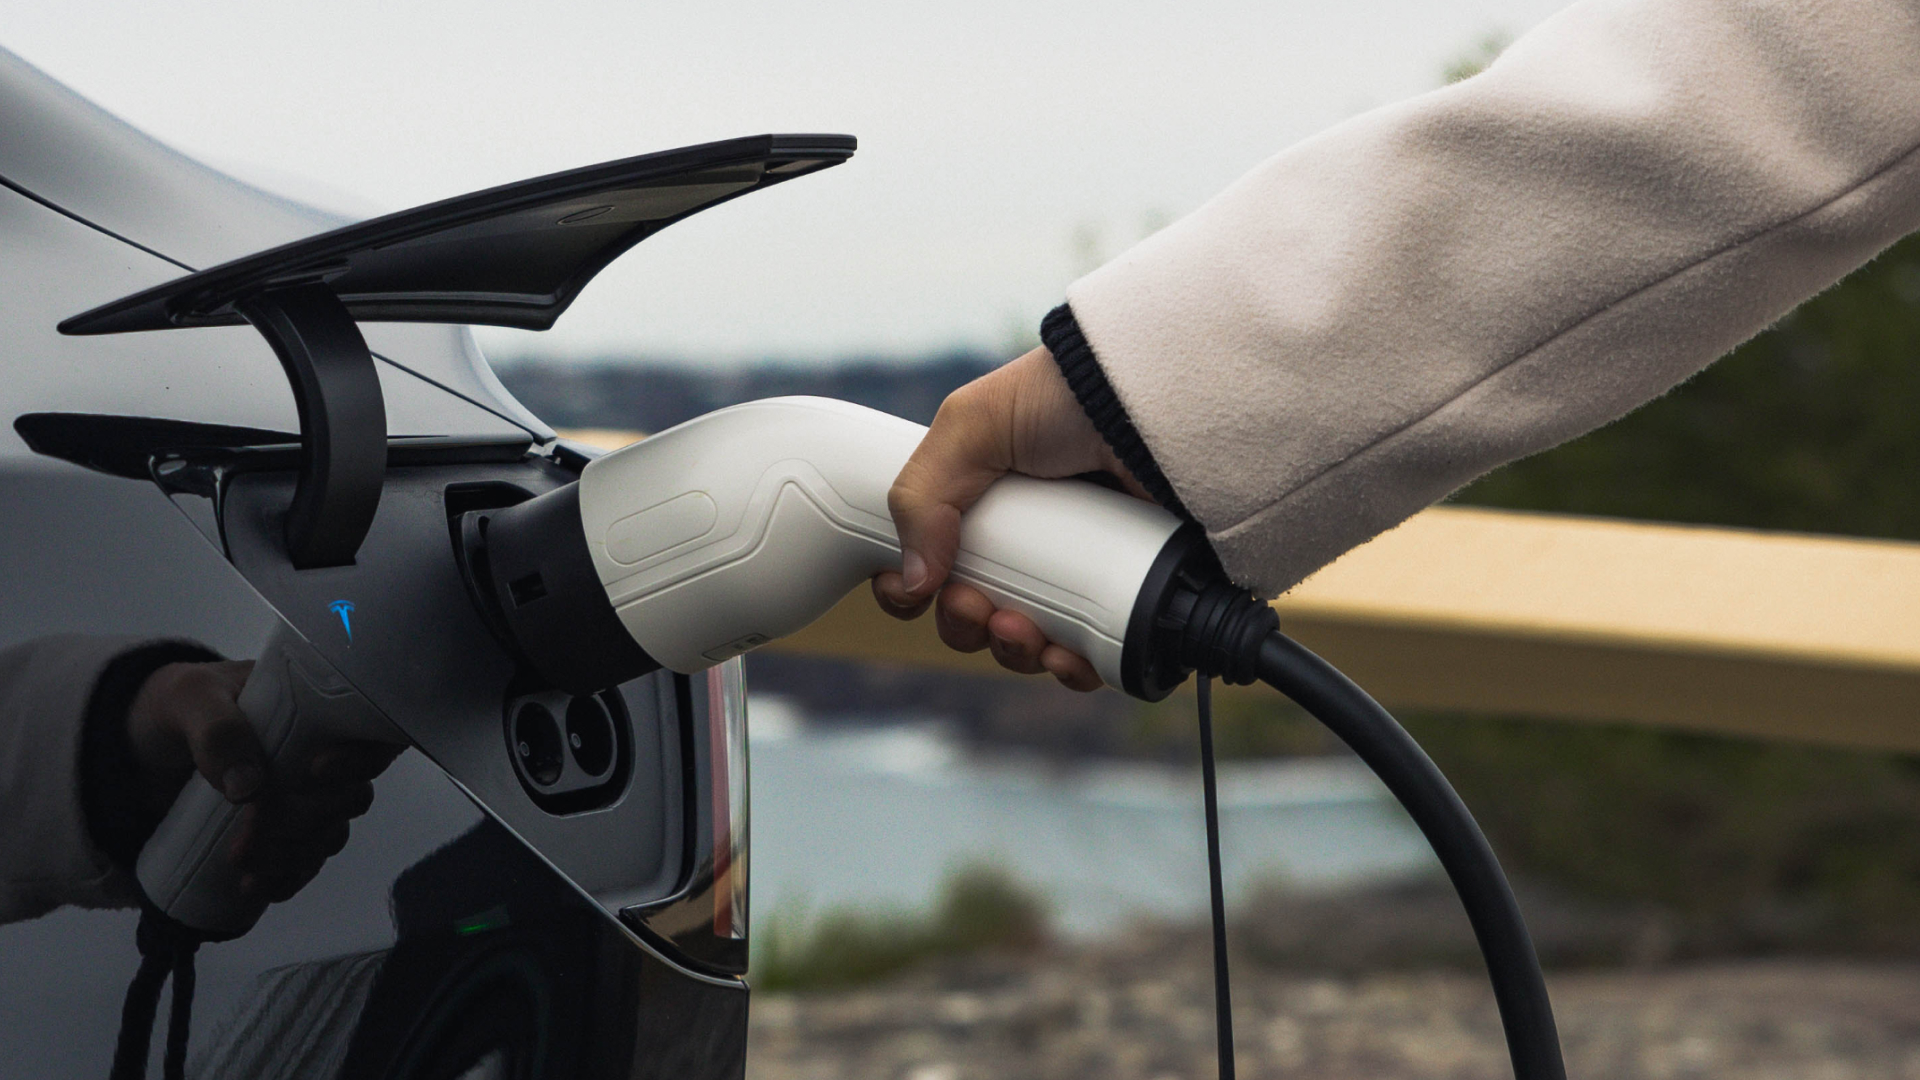 Slow vs. fast charging – what are the differences?